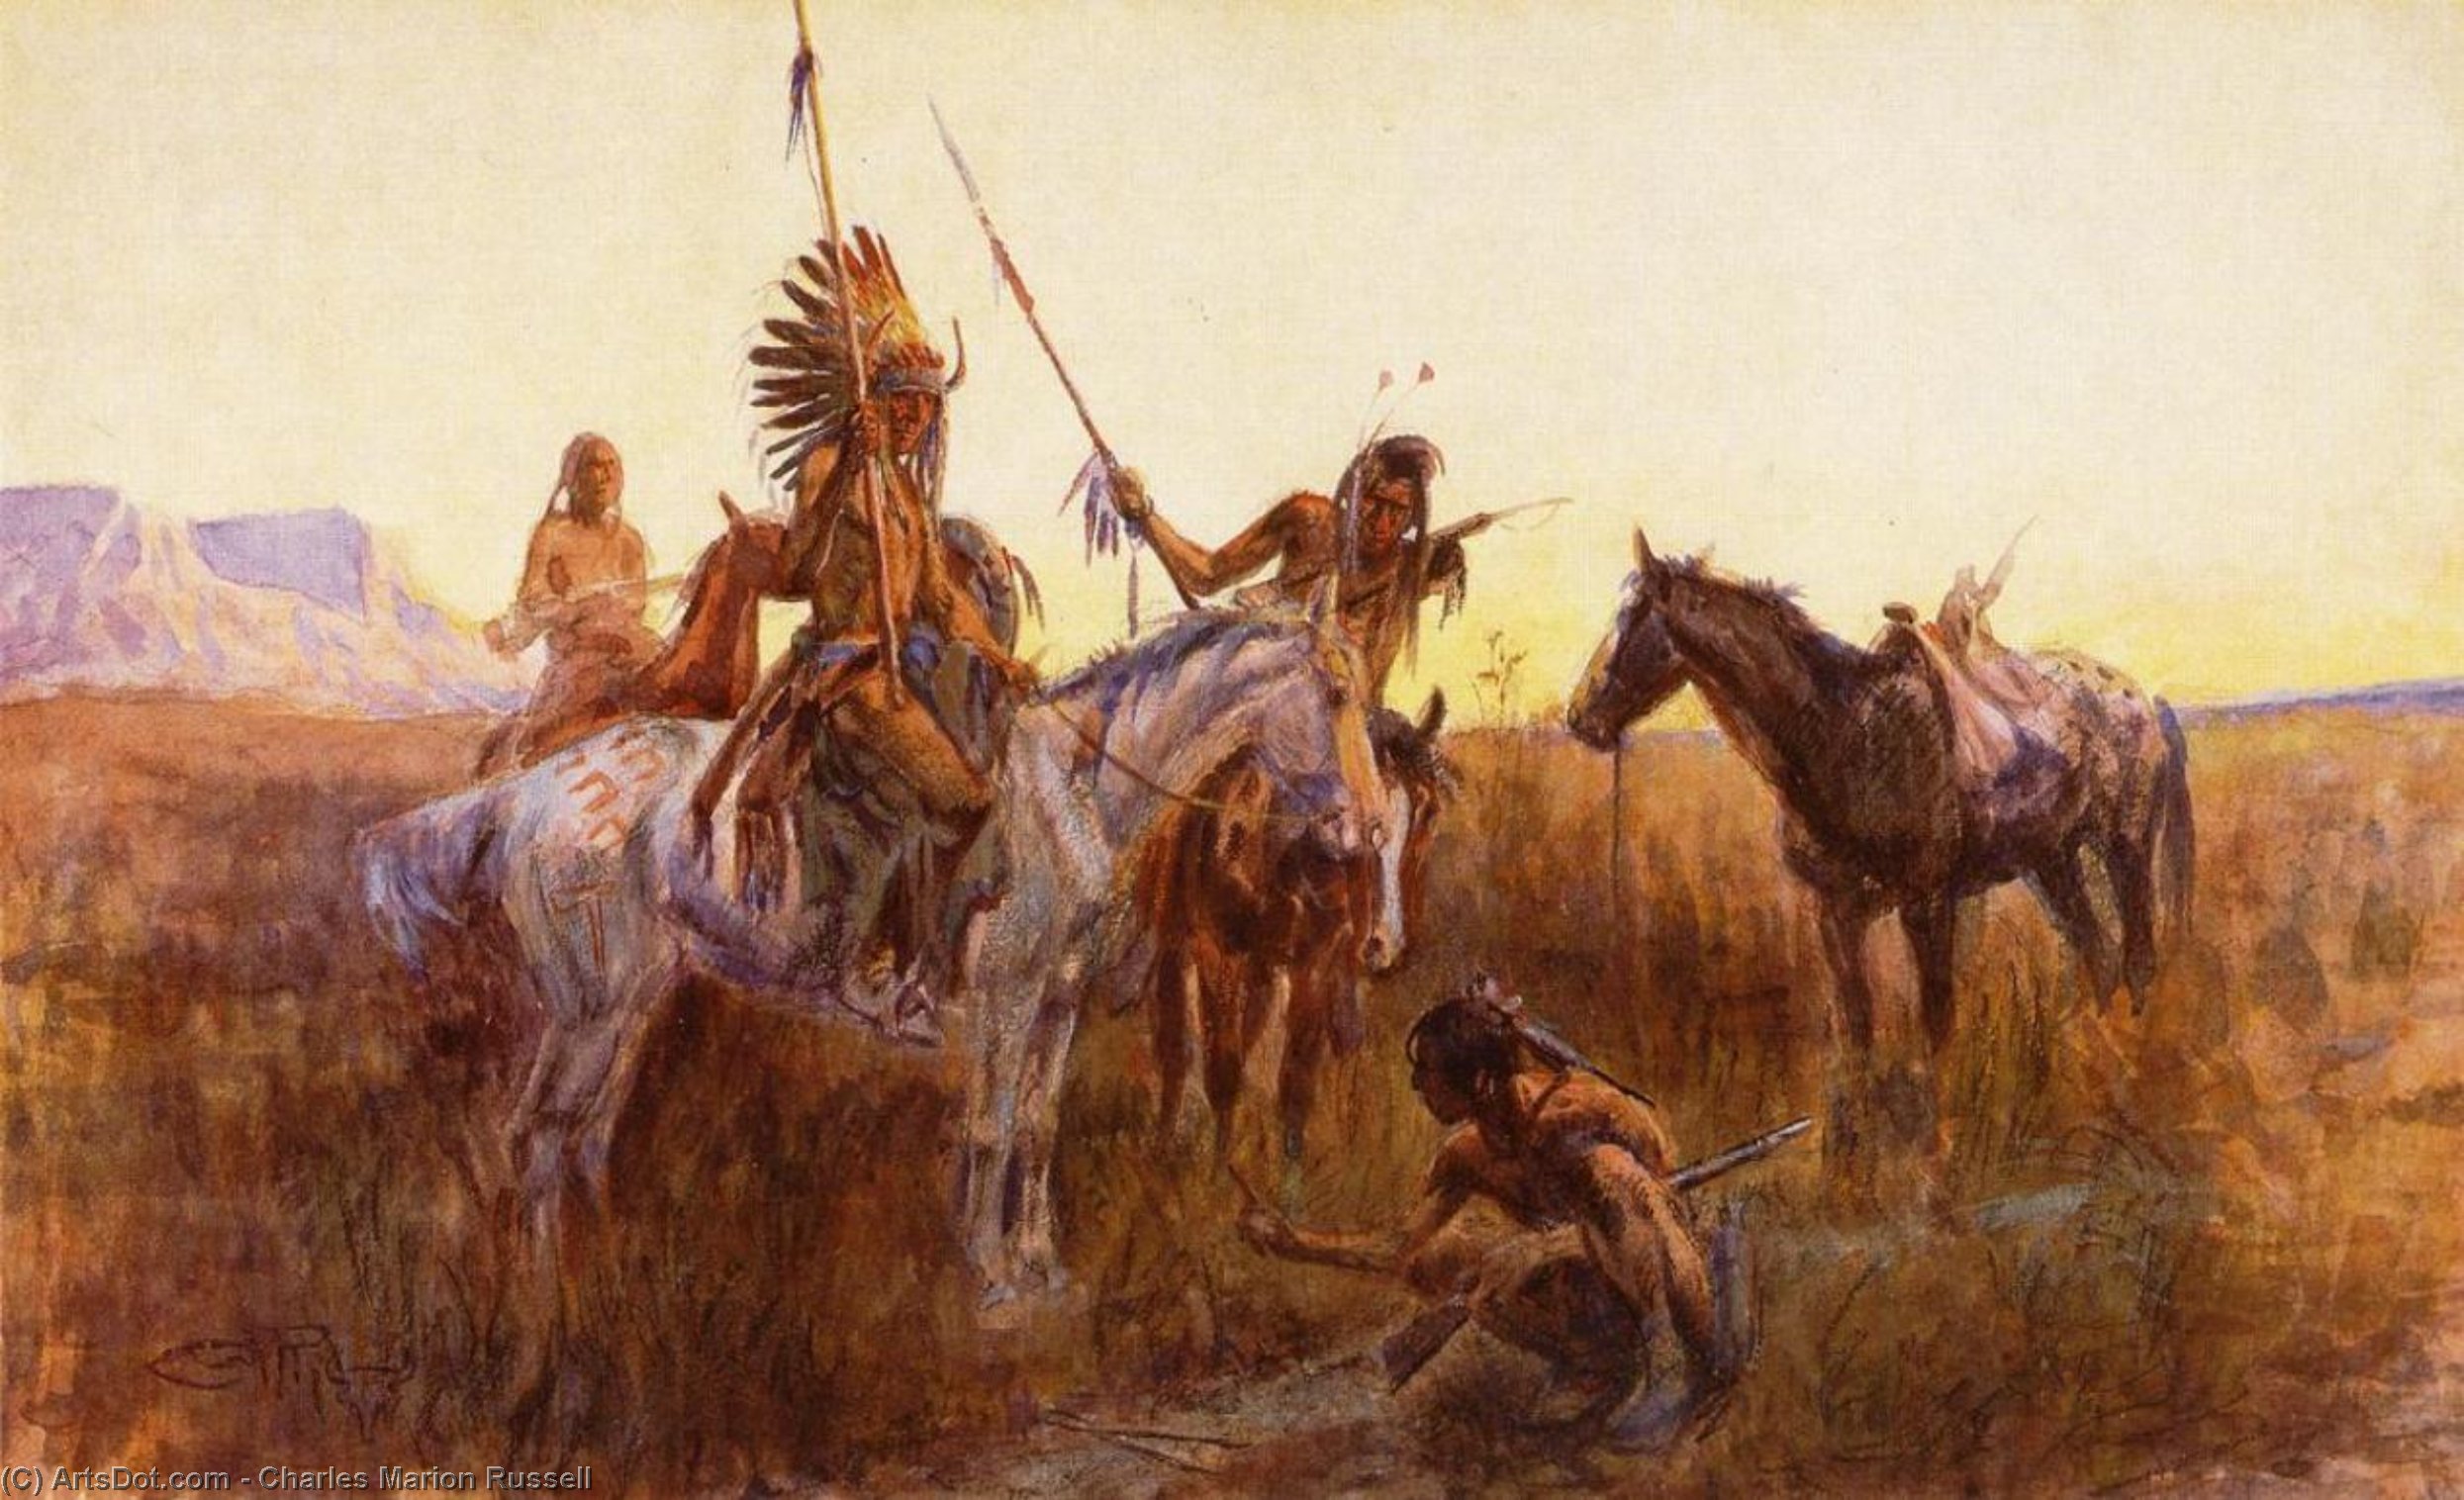 WikiOO.org - Encyclopedia of Fine Arts - Malba, Artwork Charles Marion Russell - The Lost Trail